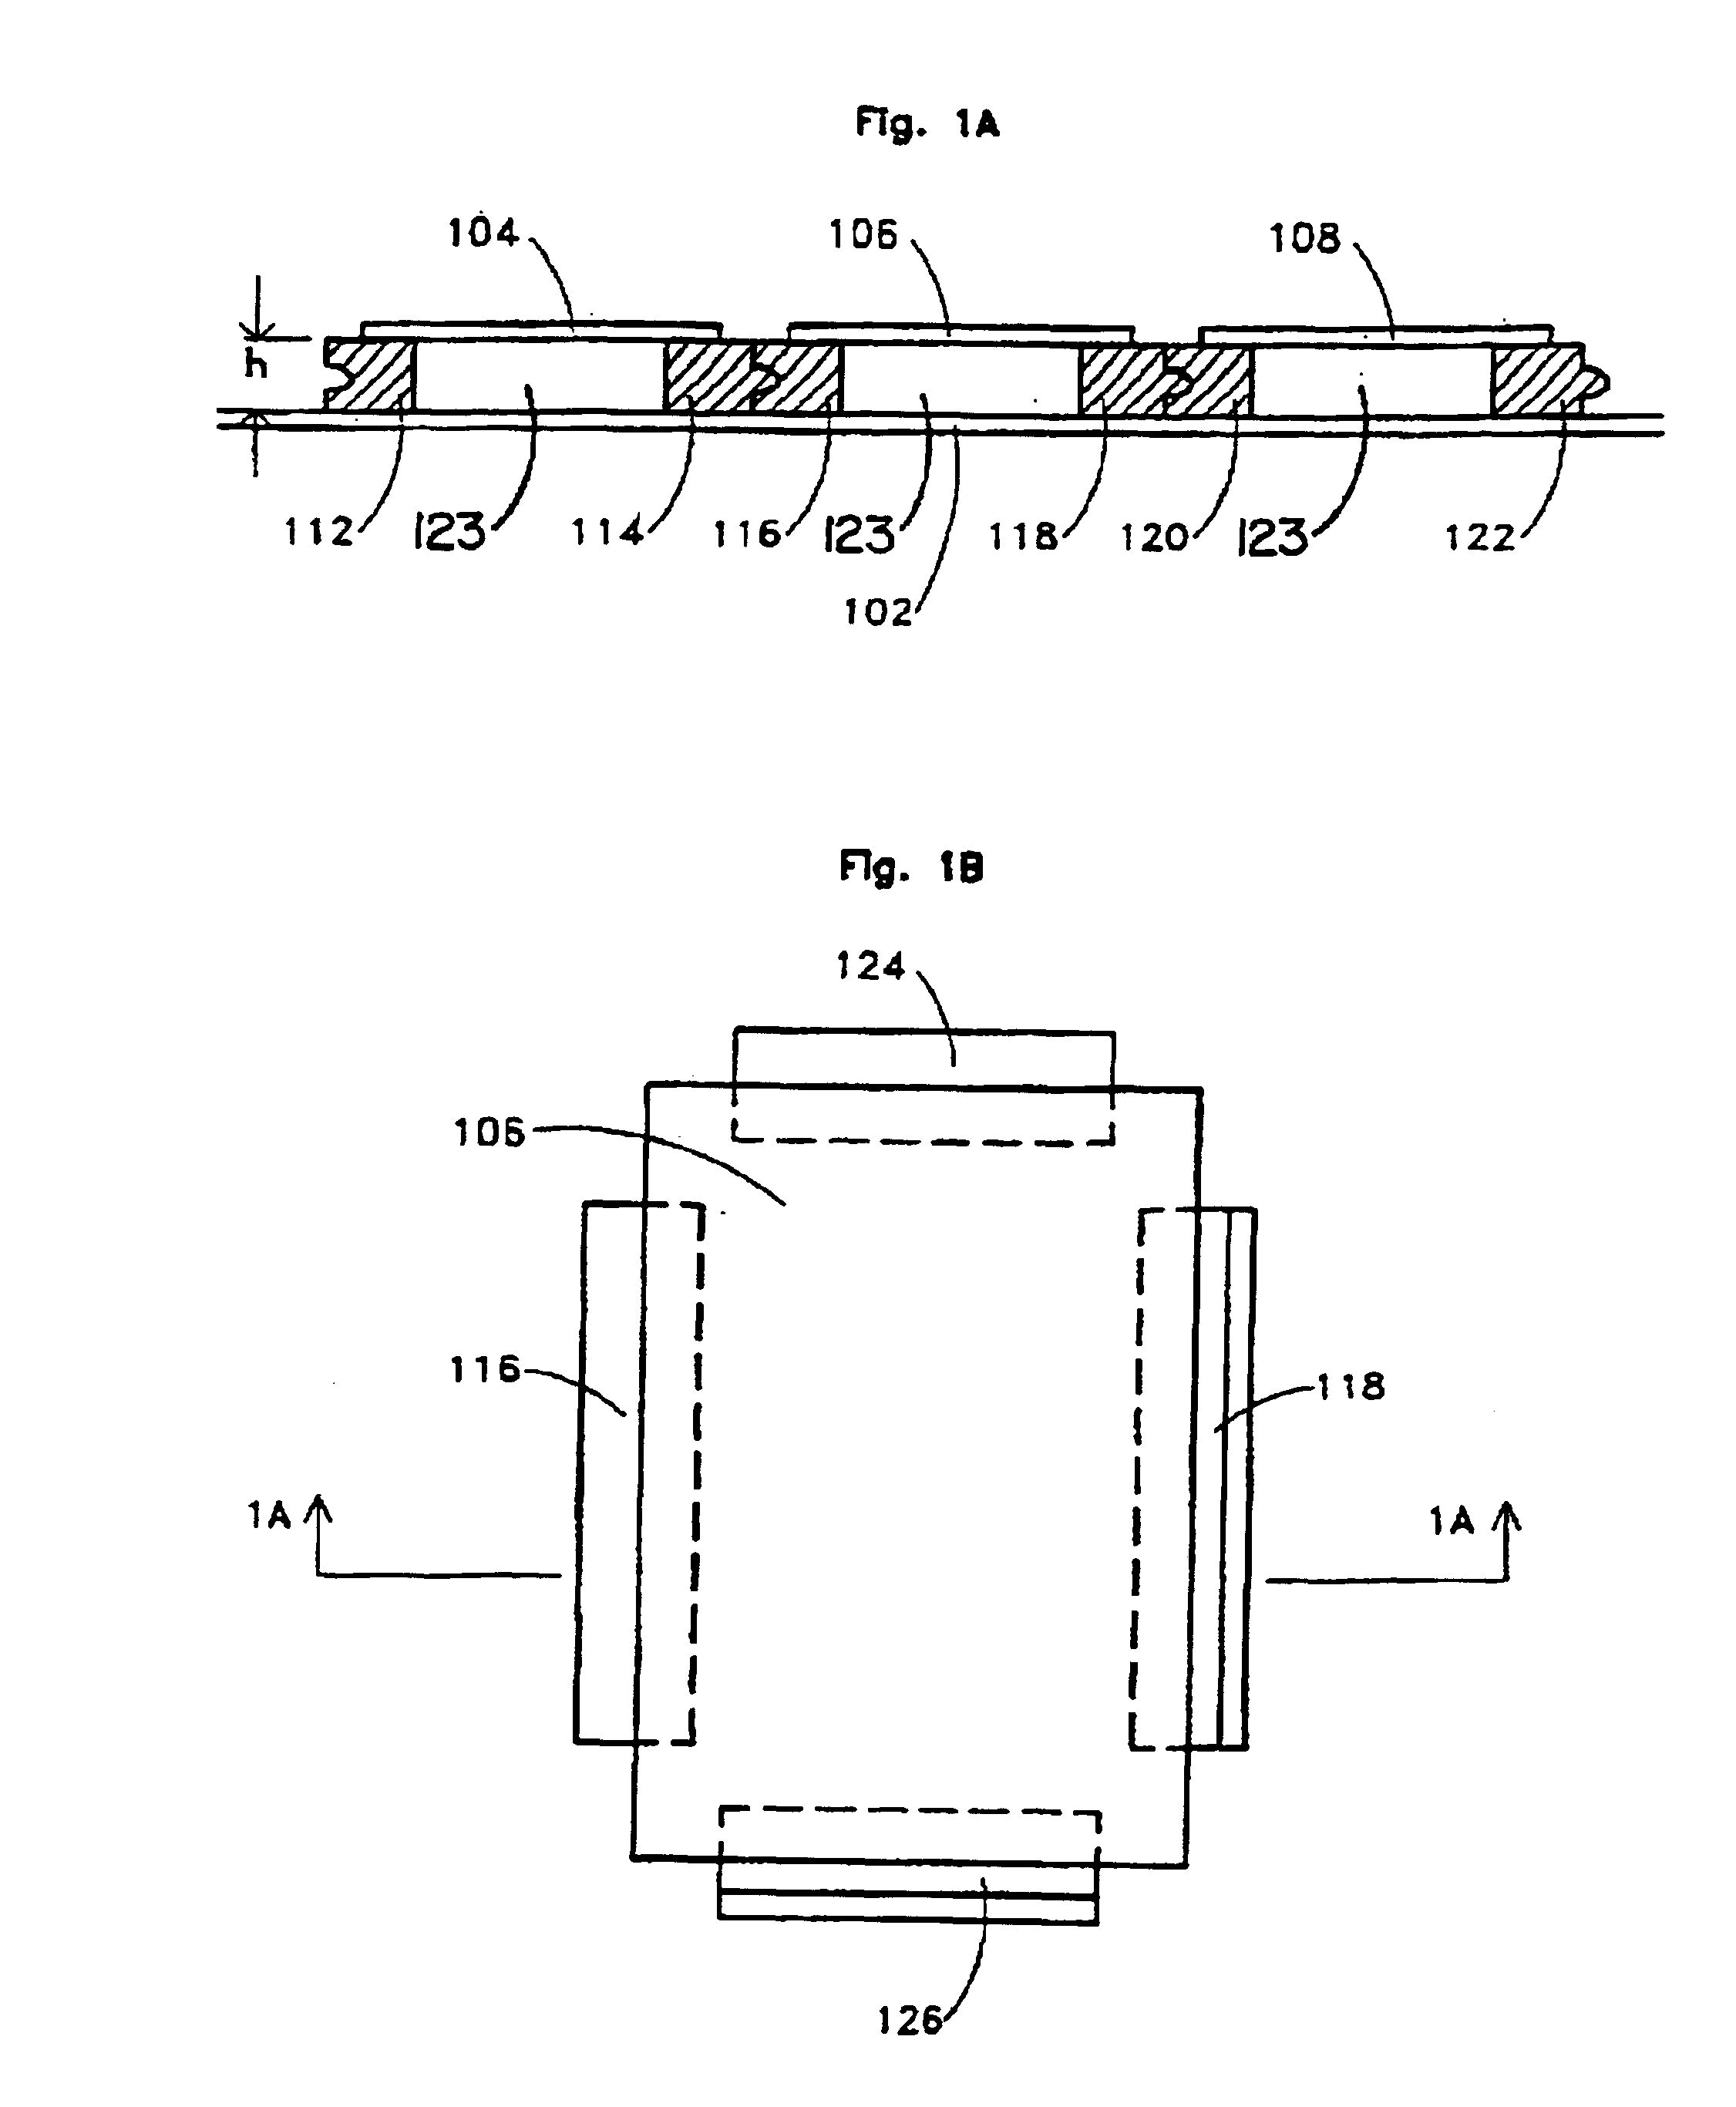 Lightweight, self-ballasting photovoltaic roofing assembly